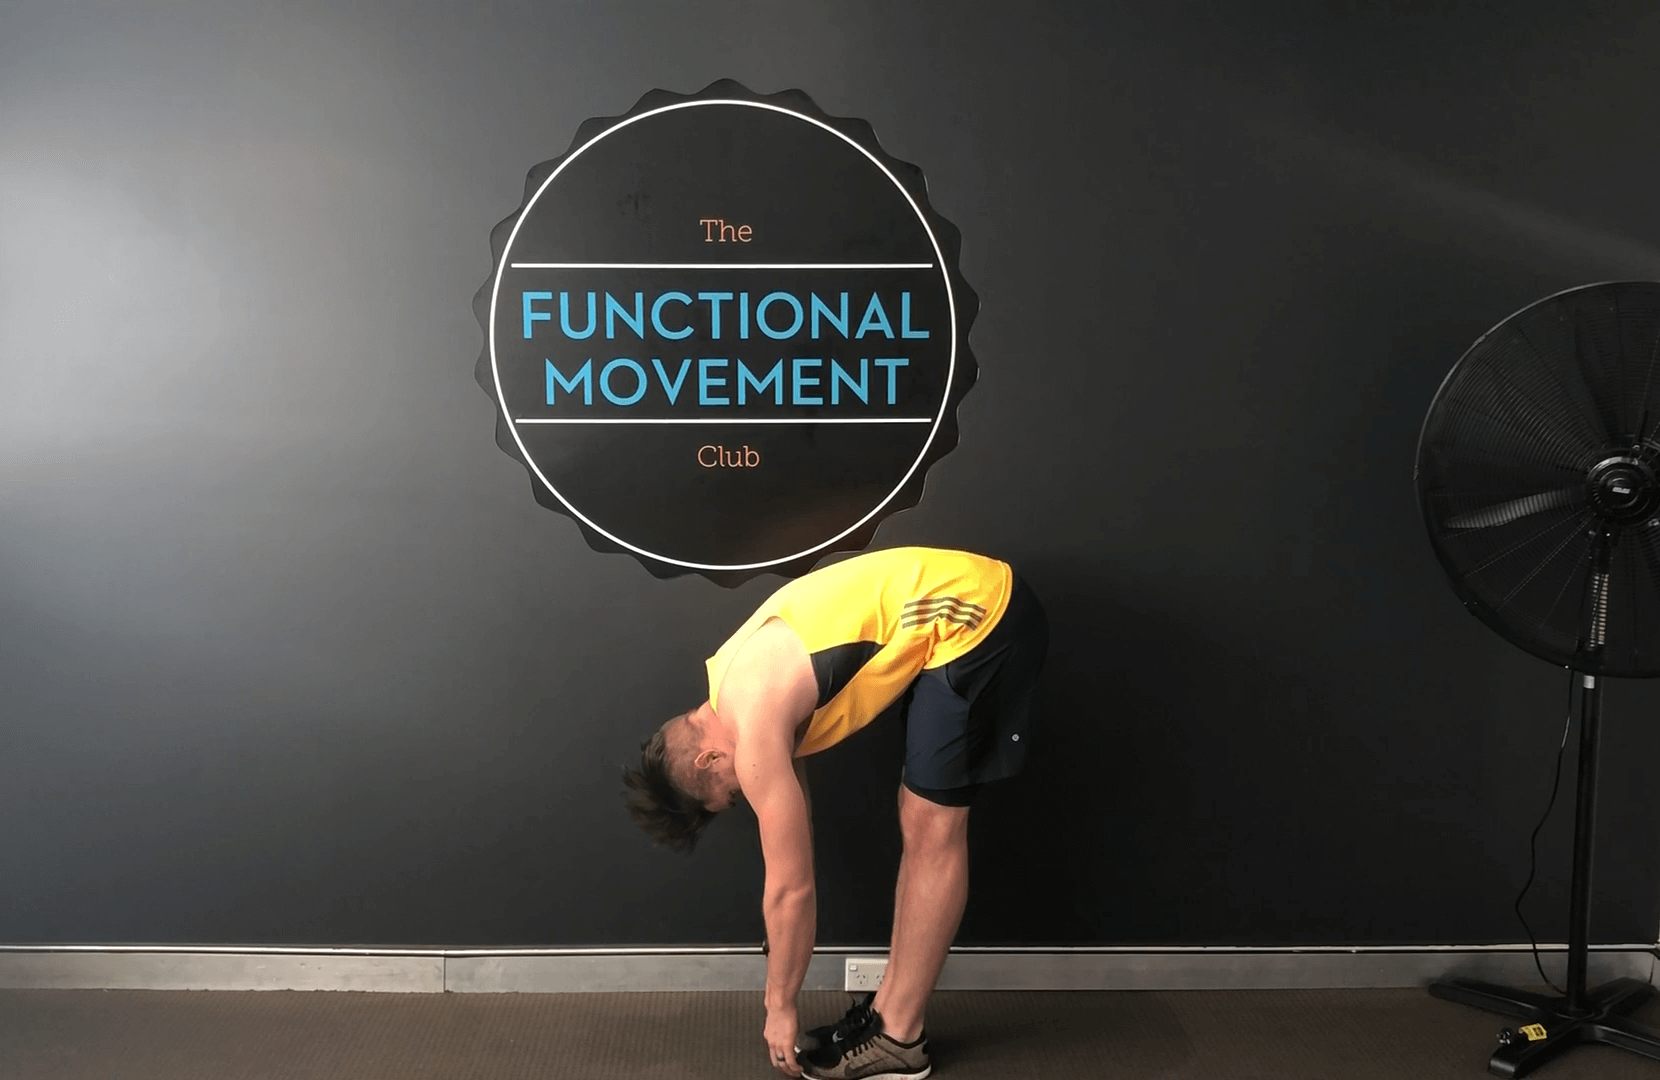 fight back pain with our 3 favourite exercises for back pain help answer am i overtraining